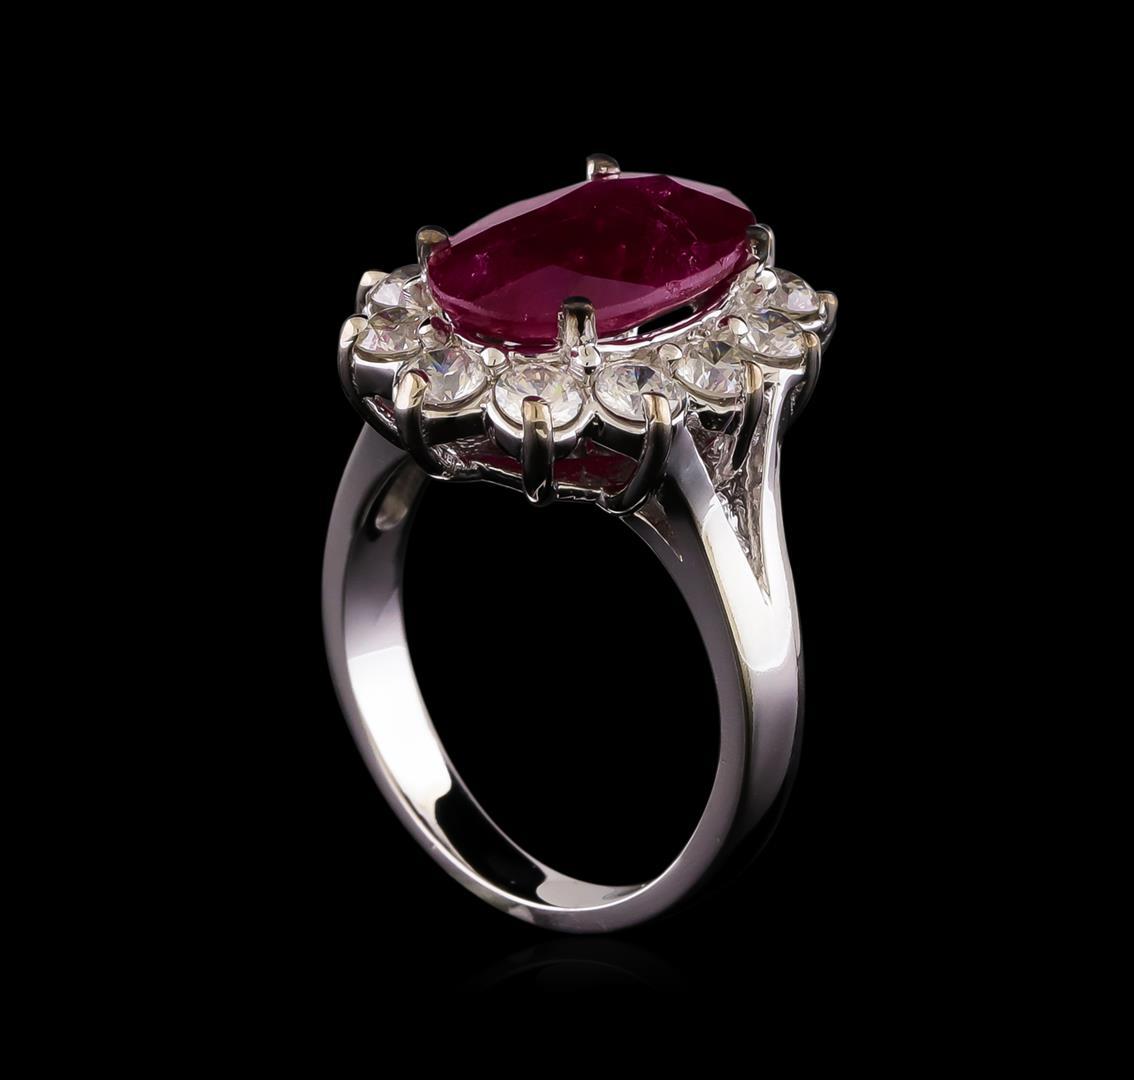 GIA Cert 4.09 ctw Ruby and Diamond Ring - 14KT White Gold